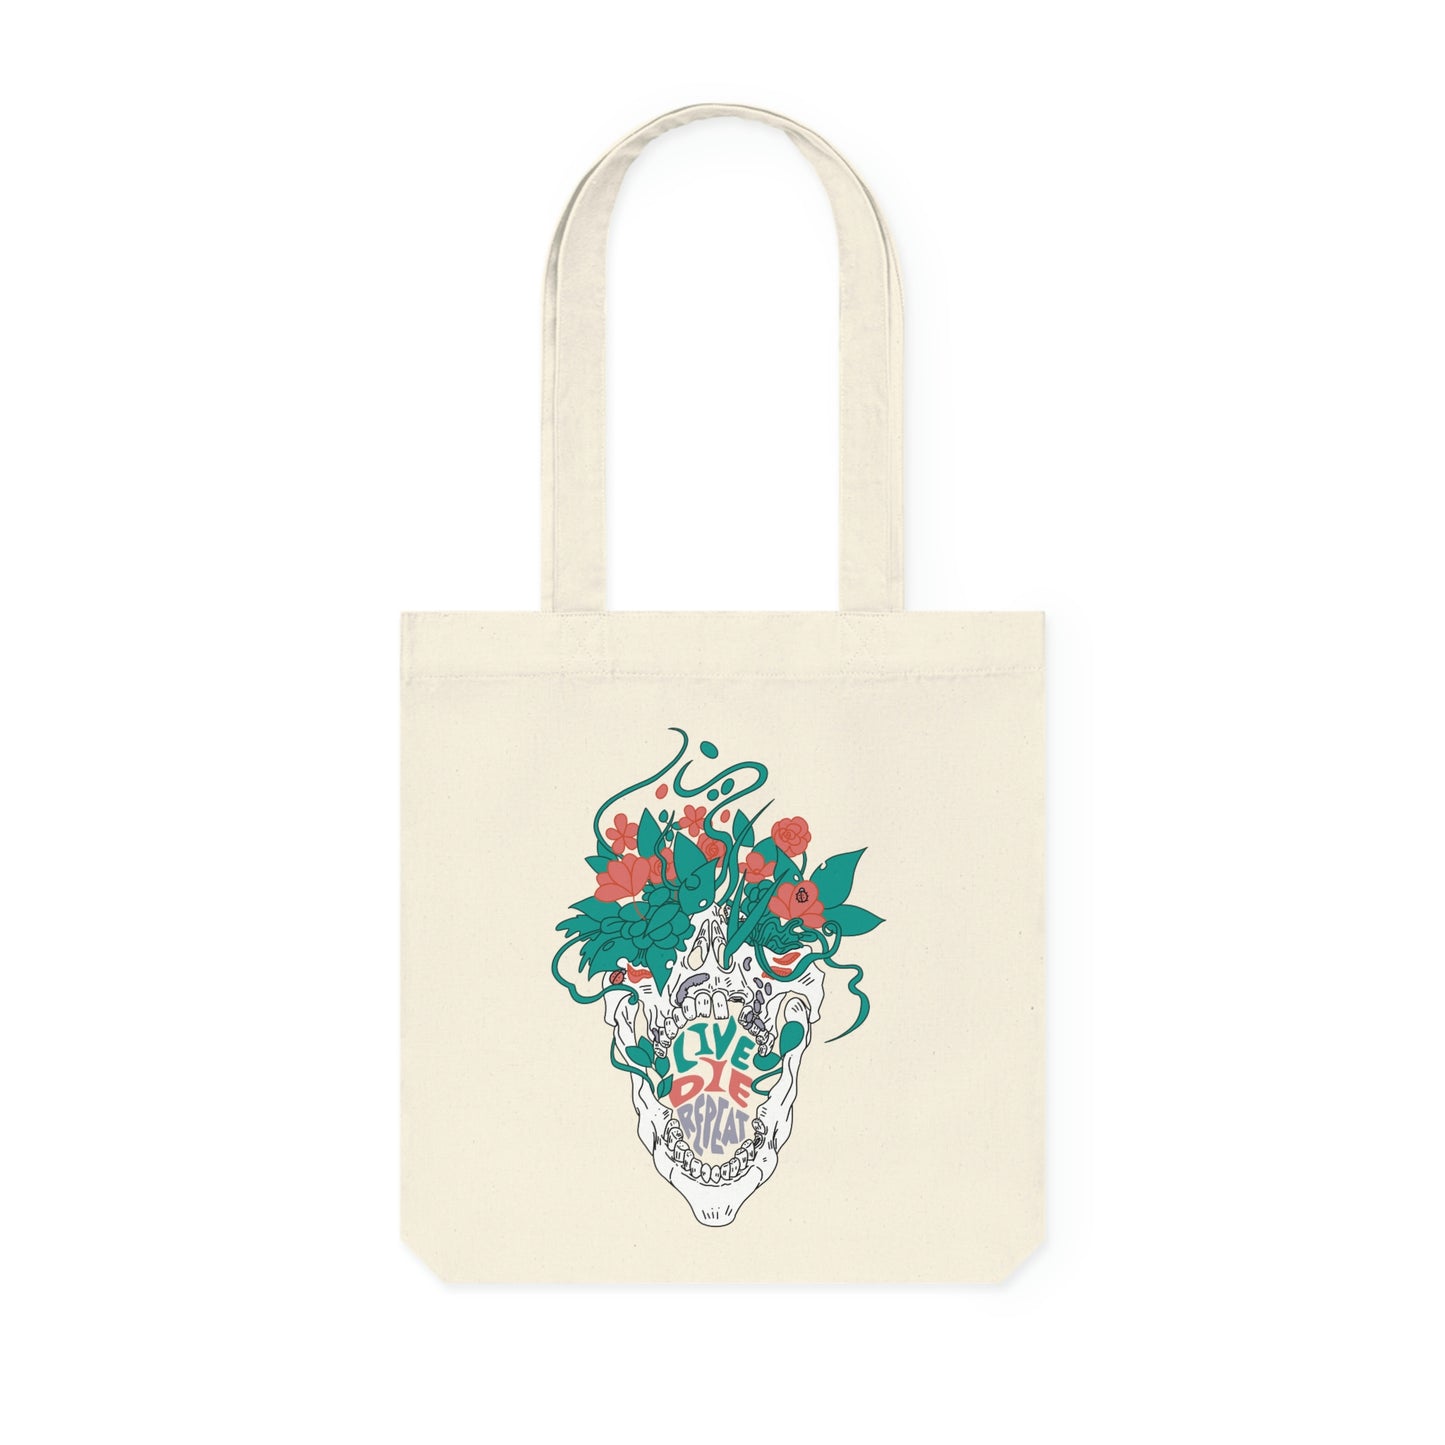 Live. Die. Repeat. Woven Tote Bag